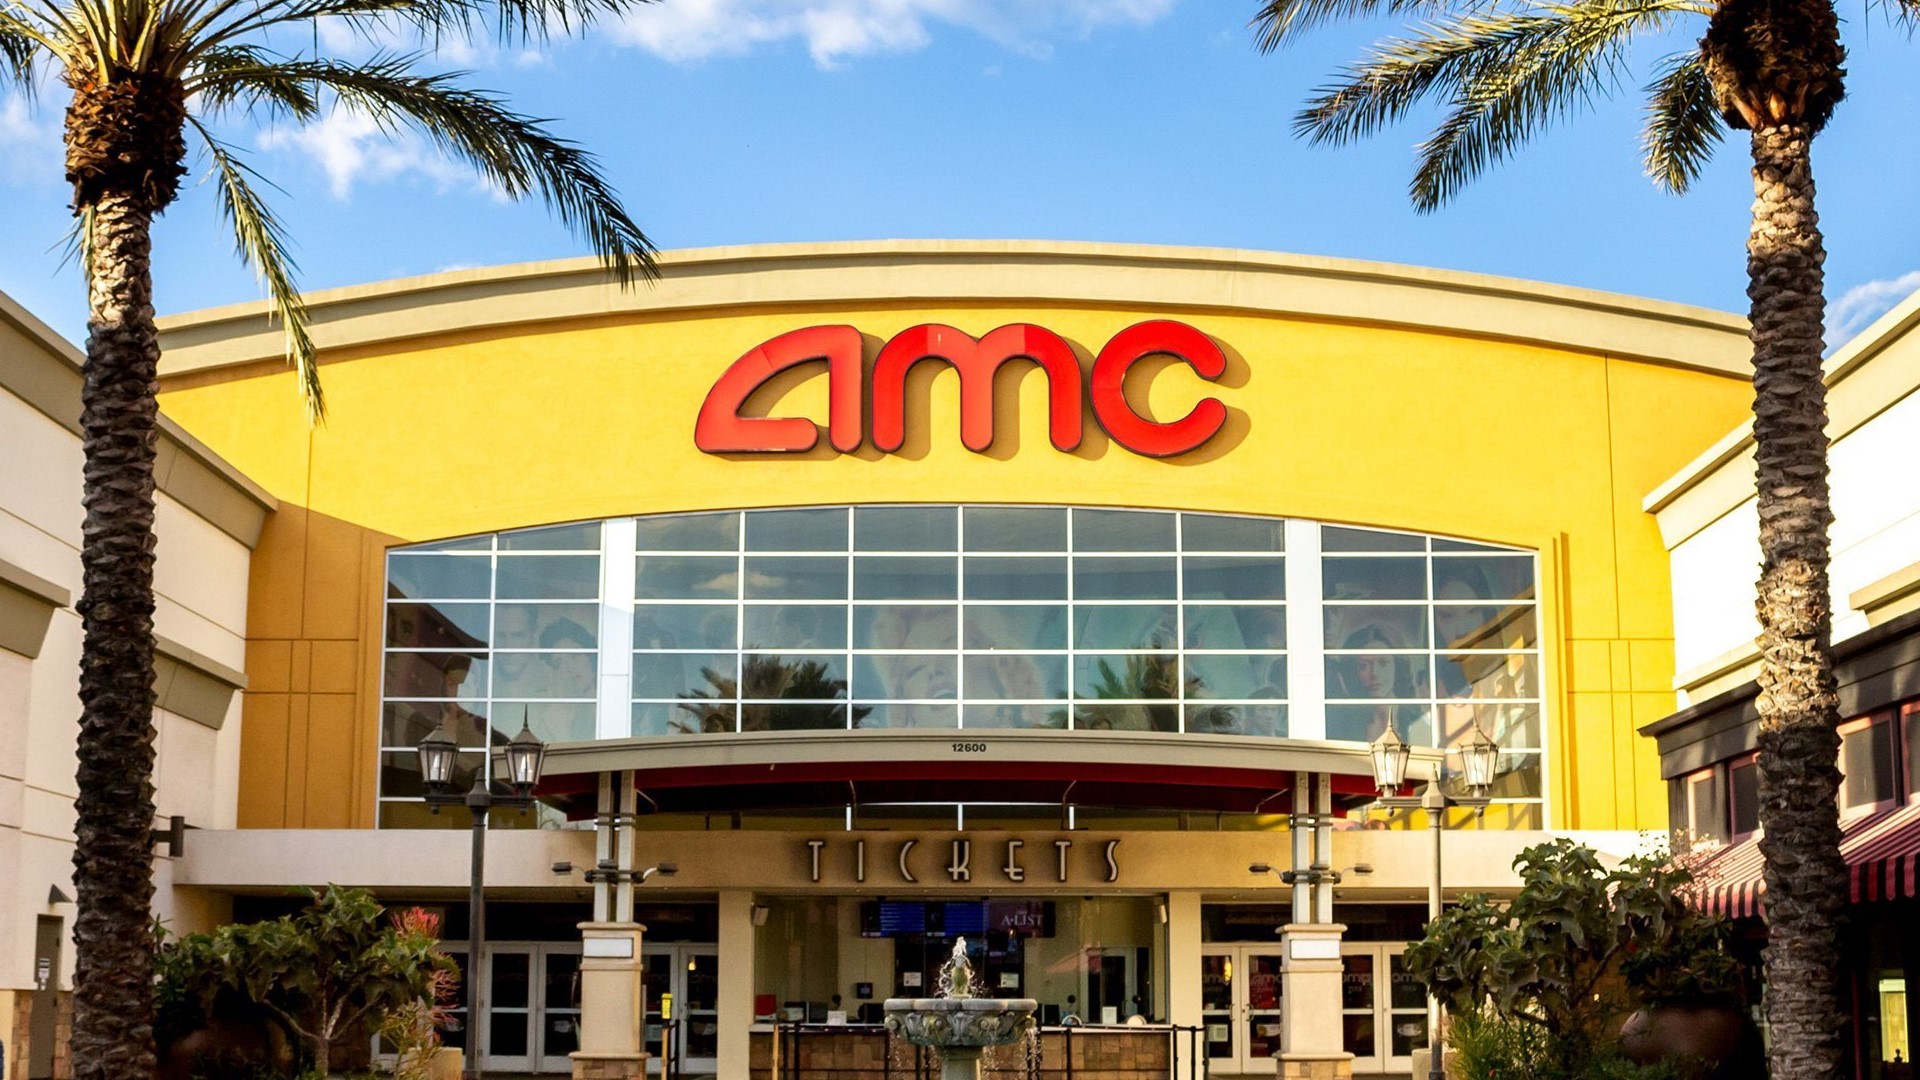 While tiered pricing by seat location is new for AMC, it's typical for live events like concerts and games.